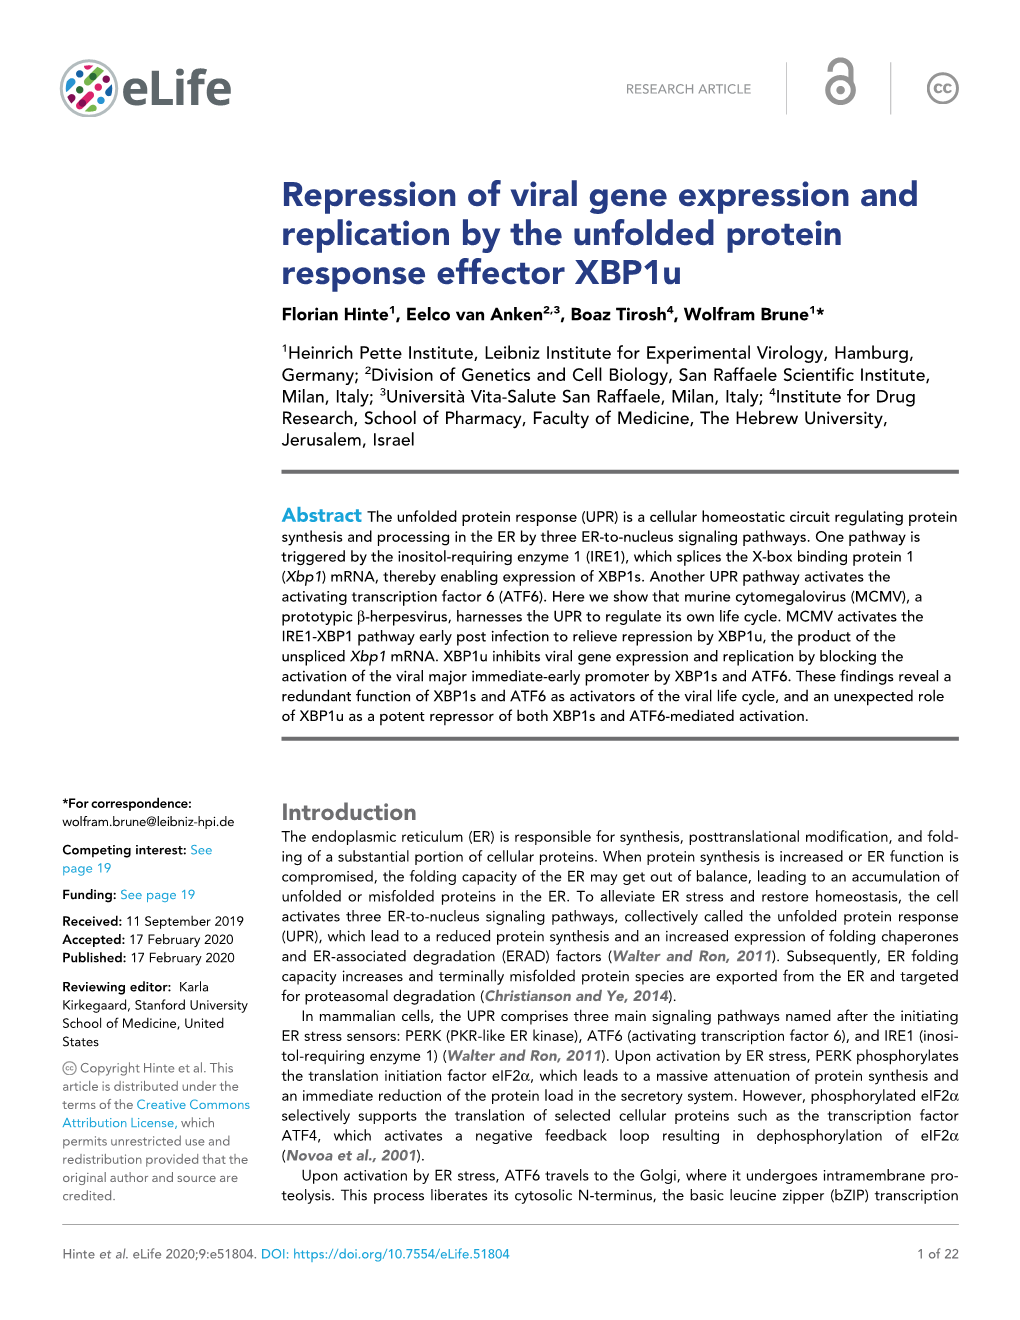 Repression of Viral Gene Expression and Replication by the Unfolded Protein Response Effector Xbp1u Florian Hinte1, Eelco Van Anken2,3, Boaz Tirosh4, Wolfram Brune1*